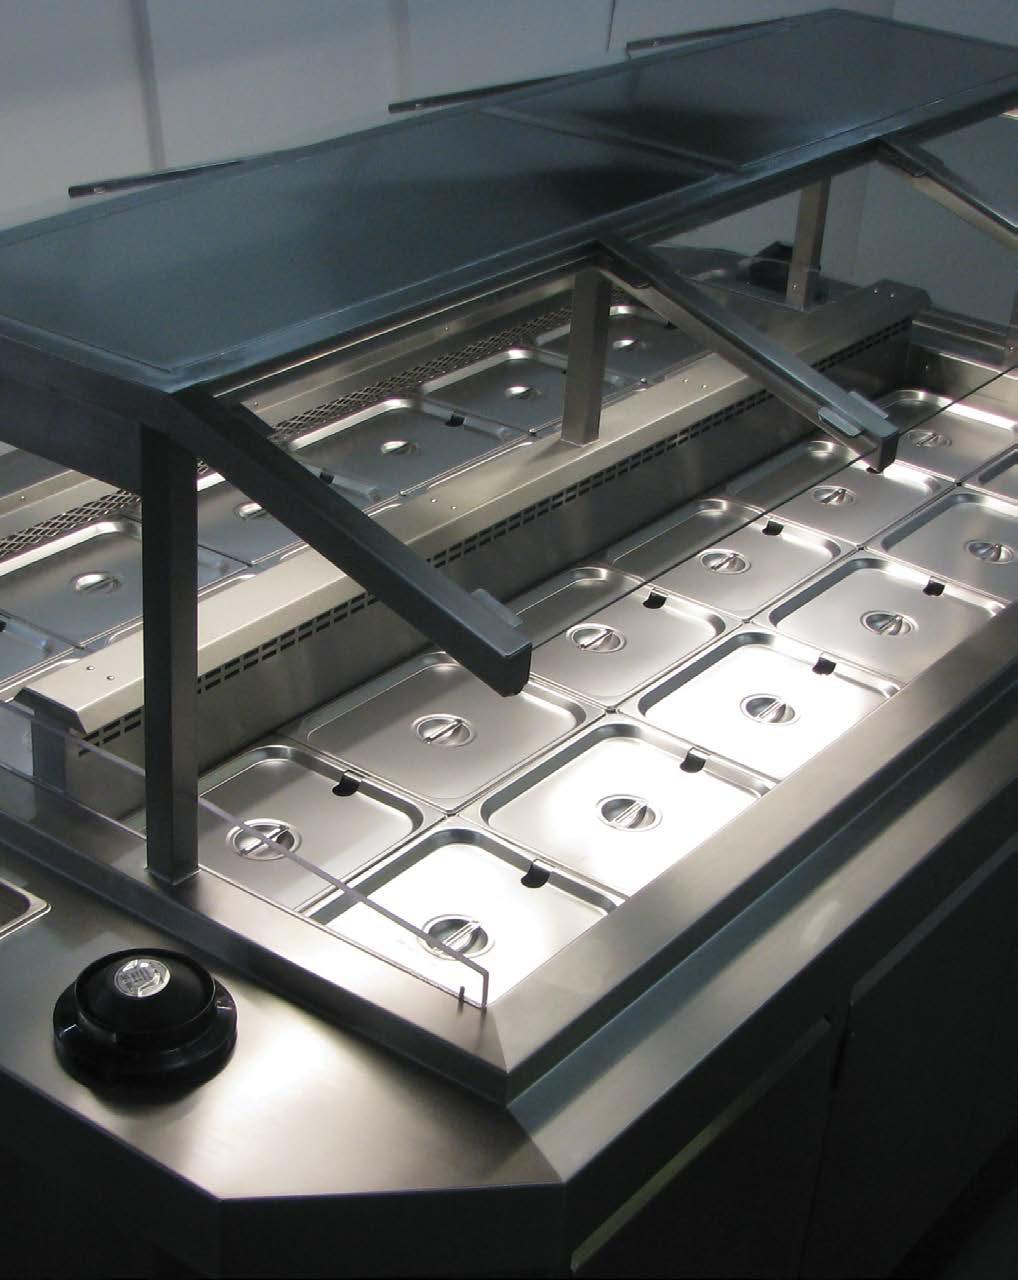 HOT AND COLD SUPERMARKET SYSTEMS Diamond s Supermarket Systems products are specifically designed and manufactured to provide operators with the ability to safely display and showcase various